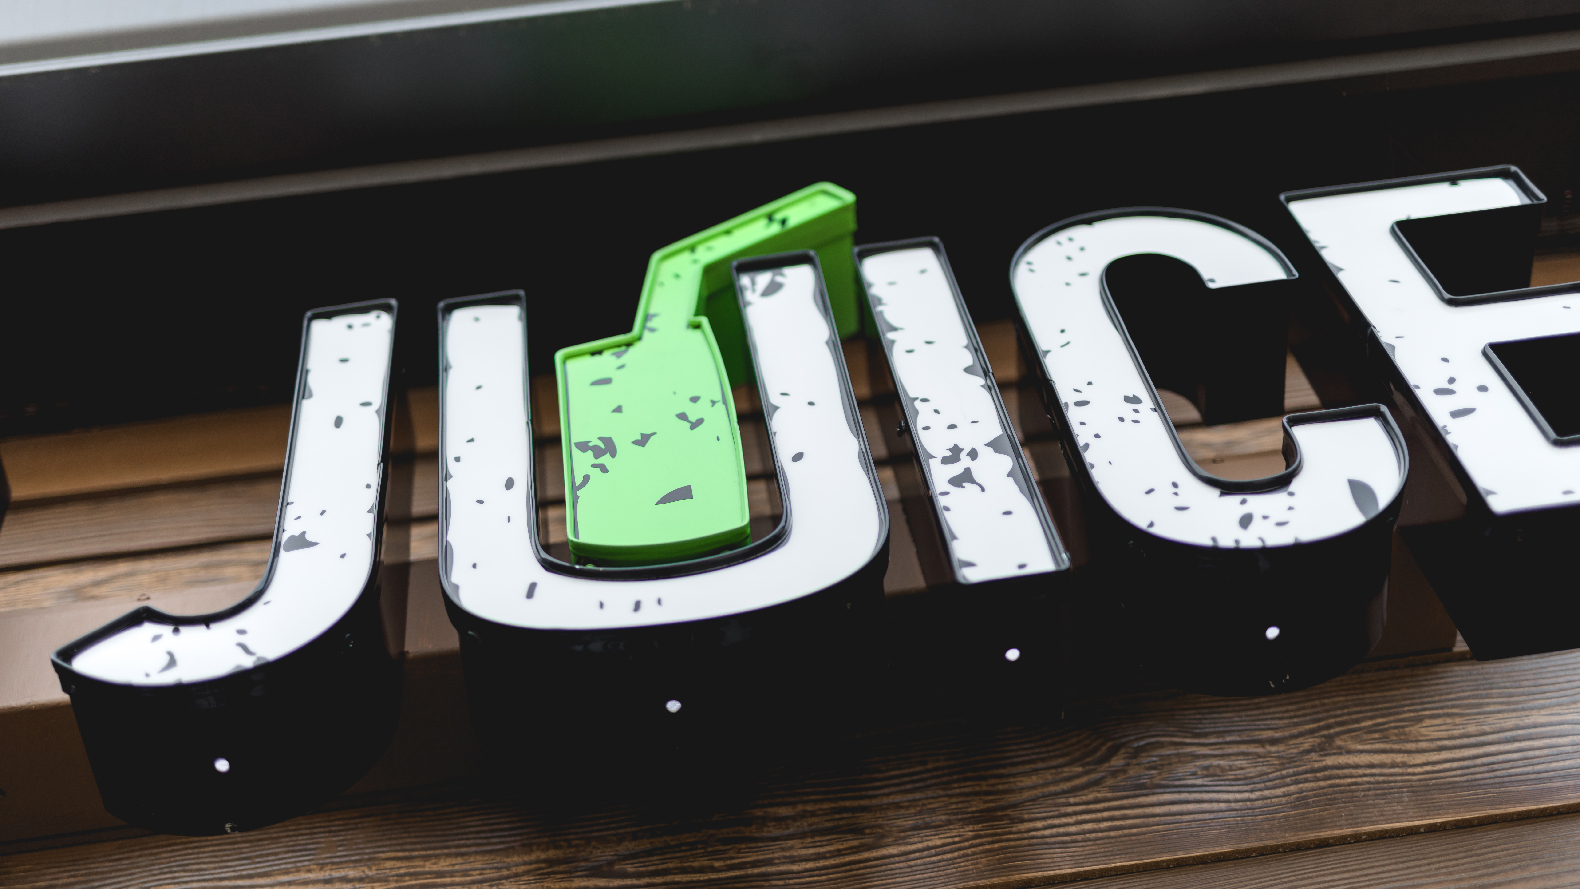 Clean Juice doubles down on growth as it enters its 31st state, signs 14 new stores in Q1 alone - Nation's Restaurant News